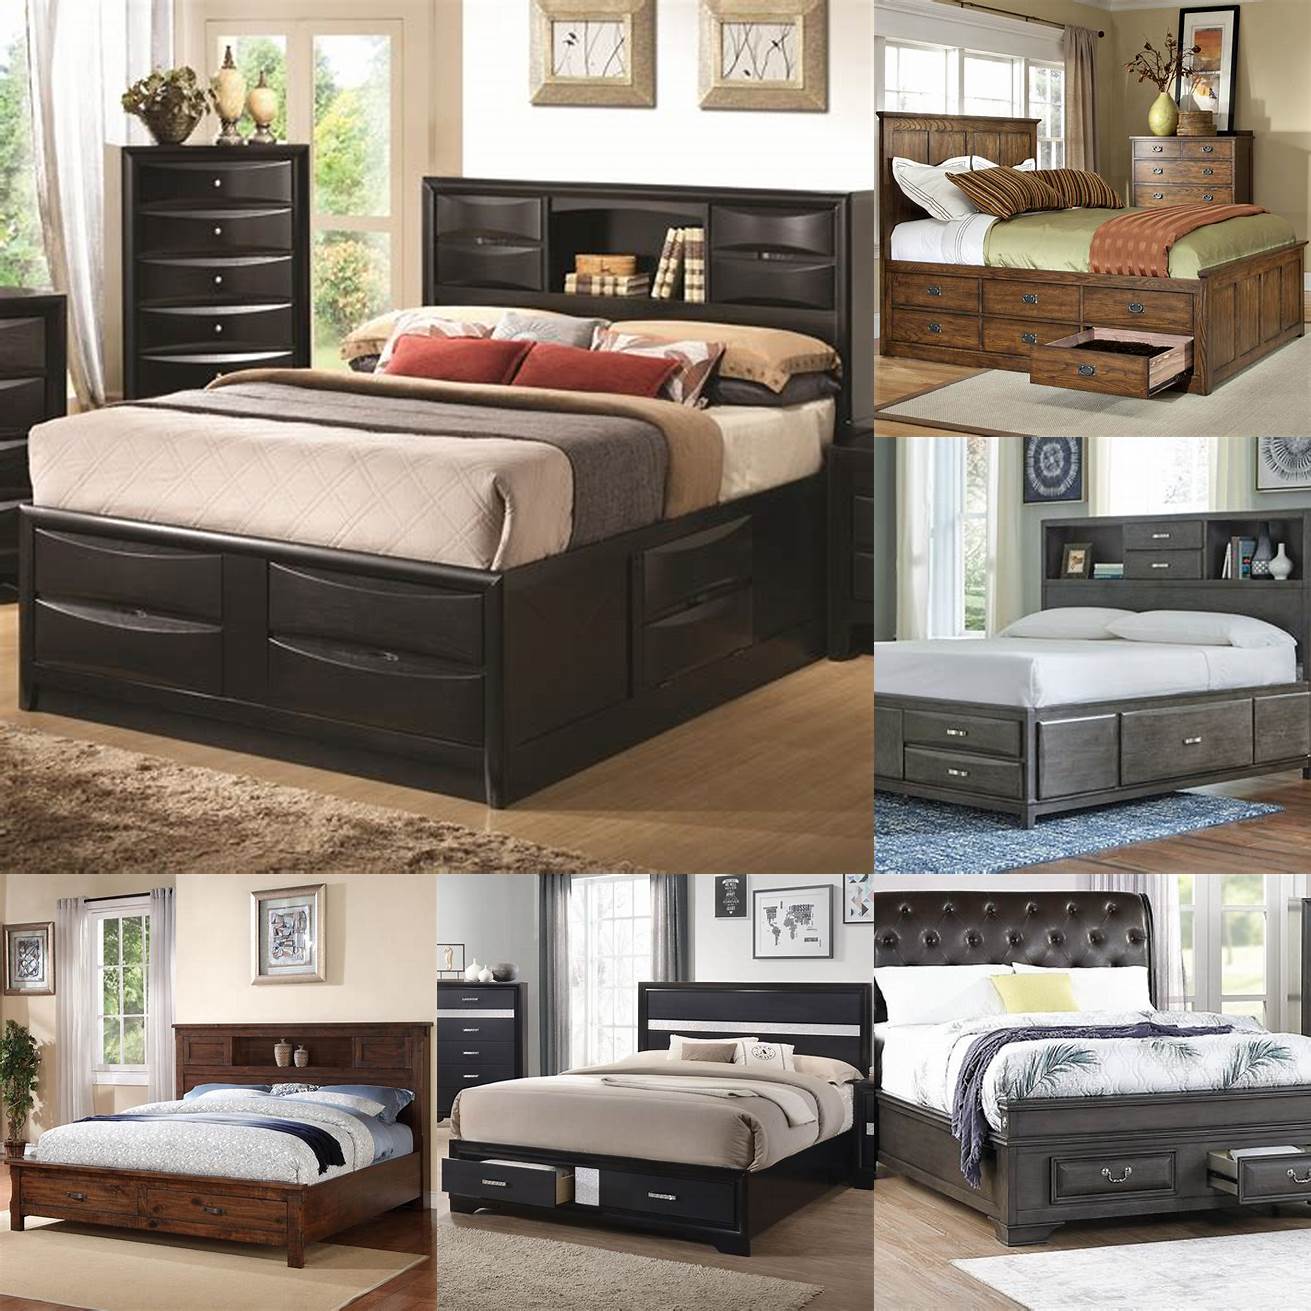 California King Size Bed Frame with Storage